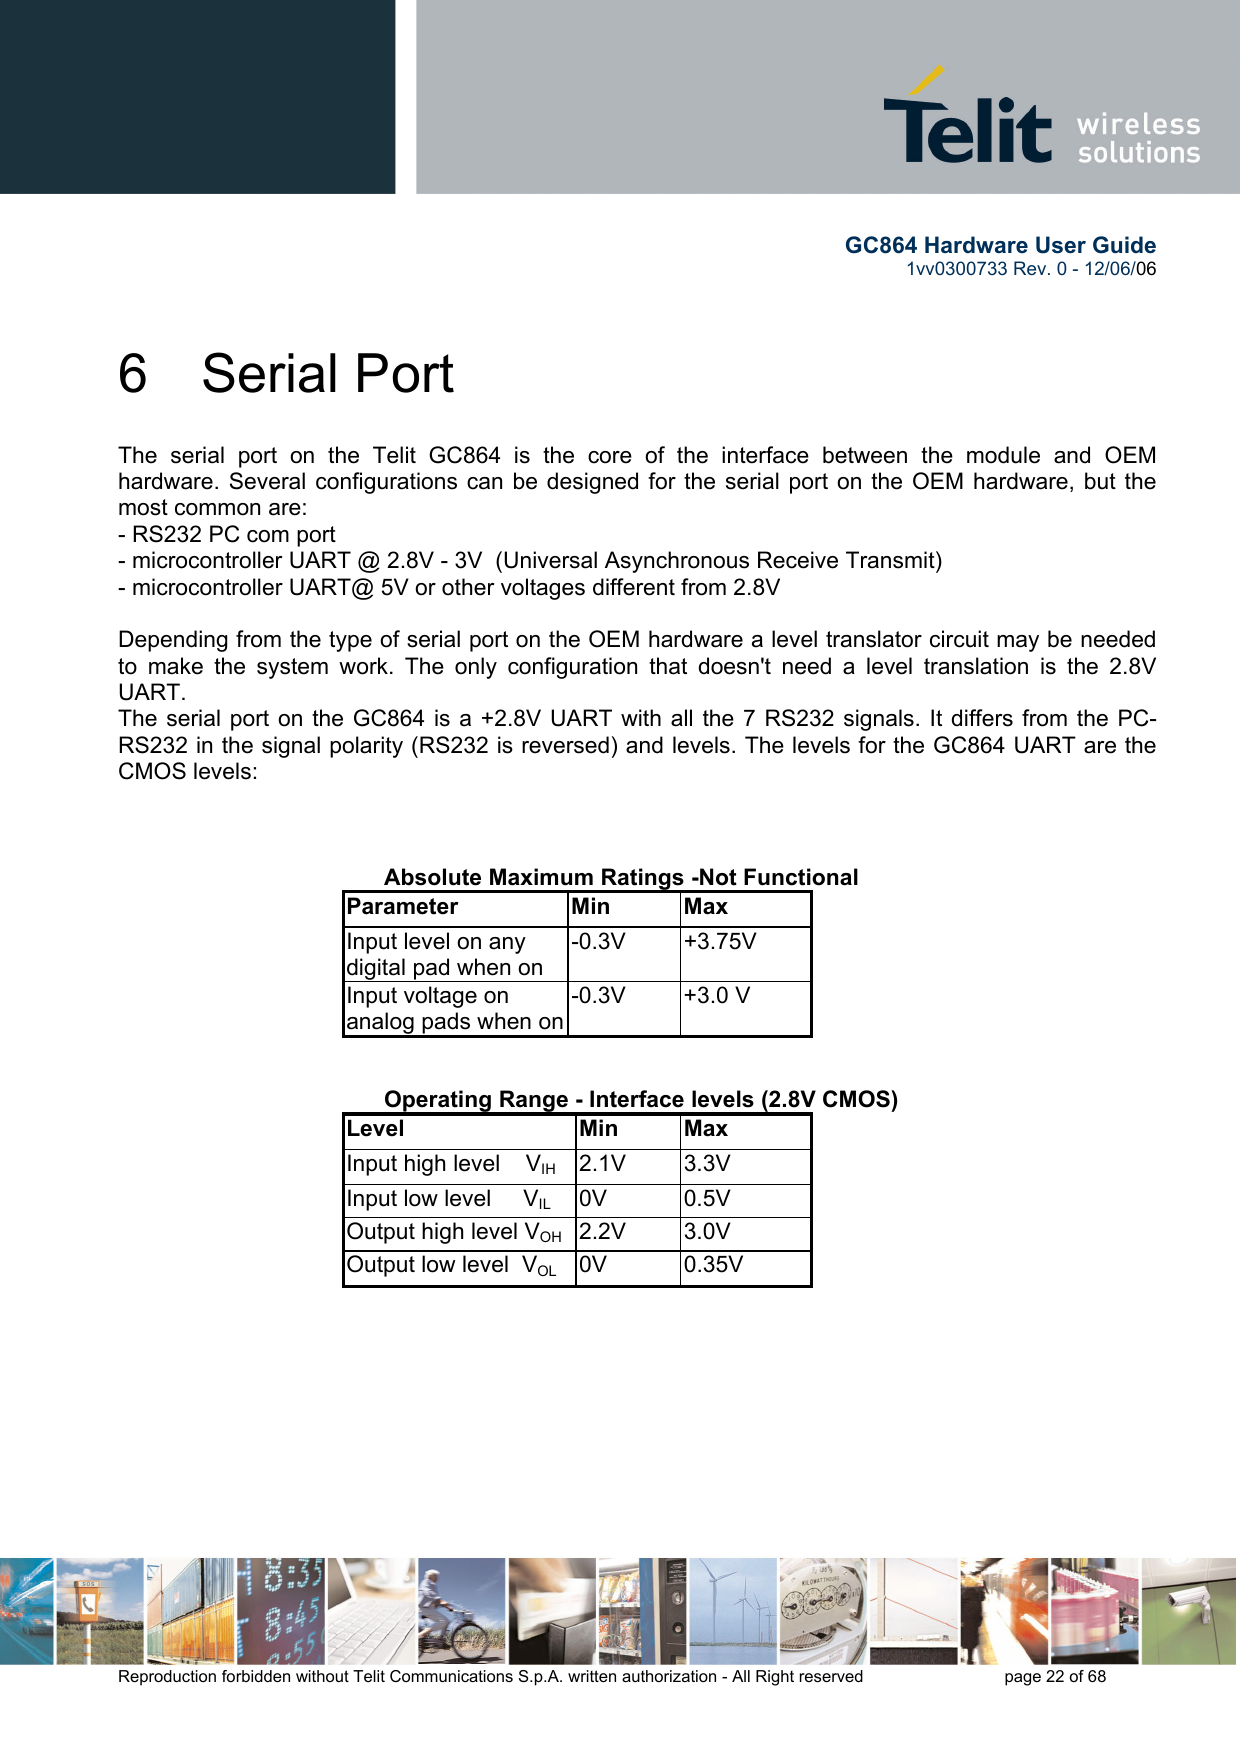        GC864 Hardware User Guide  1vv0300733 Rev. 0 - 12/06/06  Reproduction forbidden without Telit Communications S.p.A. written authorization - All Right reserved    page 22 of 68  6 Serial Port The serial port on the Telit GC864 is the core of the interface between the module and OEM hardware. Several configurations can be designed for the serial port on the OEM hardware, but the most common are: - RS232 PC com port - microcontroller UART @ 2.8V - 3V  (Universal Asynchronous Receive Transmit)  - microcontroller UART@ 5V or other voltages different from 2.8V   Depending from the type of serial port on the OEM hardware a level translator circuit may be needed to make the system work. The only configuration that doesn&apos;t need a level translation is the 2.8V UART. The serial port on the GC864 is a +2.8V UART with all the 7 RS232 signals. It differs from the PC-RS232 in the signal polarity (RS232 is reversed) and levels. The levels for the GC864 UART are the CMOS levels:       Absolute Maximum Ratings -Not Functional Parameter Min Max Input level on any digital pad when on -0.3V +3.75V Input voltage on analog pads when on-0.3V +3.0 V      Operating Range - Interface levels (2.8V CMOS) Level Min Max Input high level    VIH  2.1V 3.3V Input low level     VIL 0V  0.5V Output high level VOH 2.2V  3.0V Output low level  VOL 0V  0.35V     